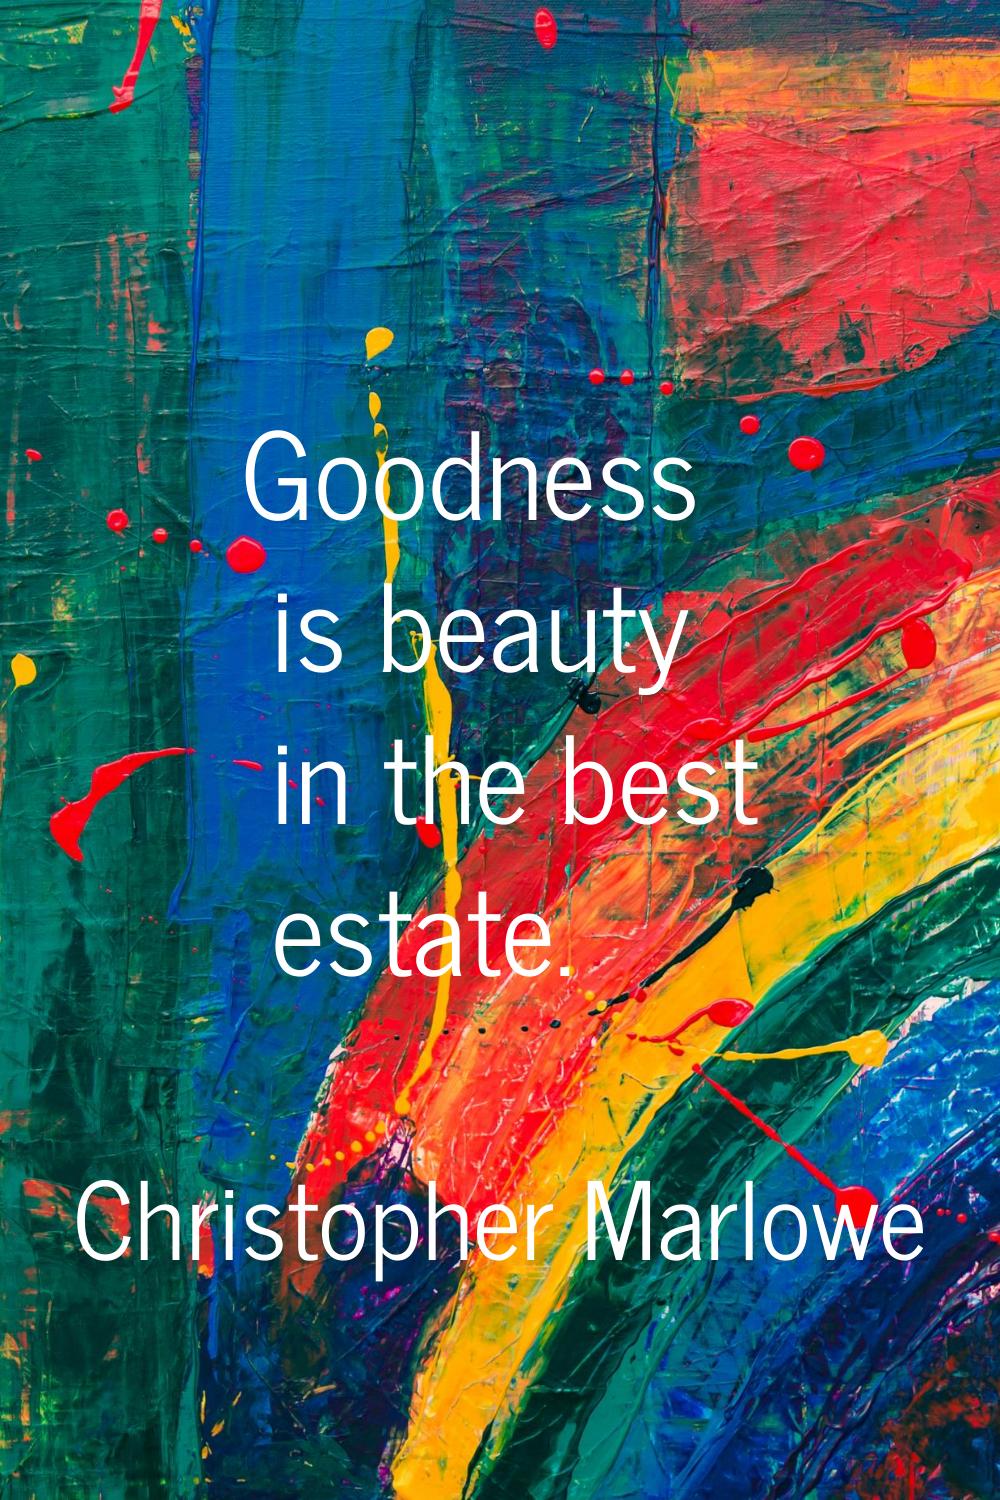 Goodness is beauty in the best estate.